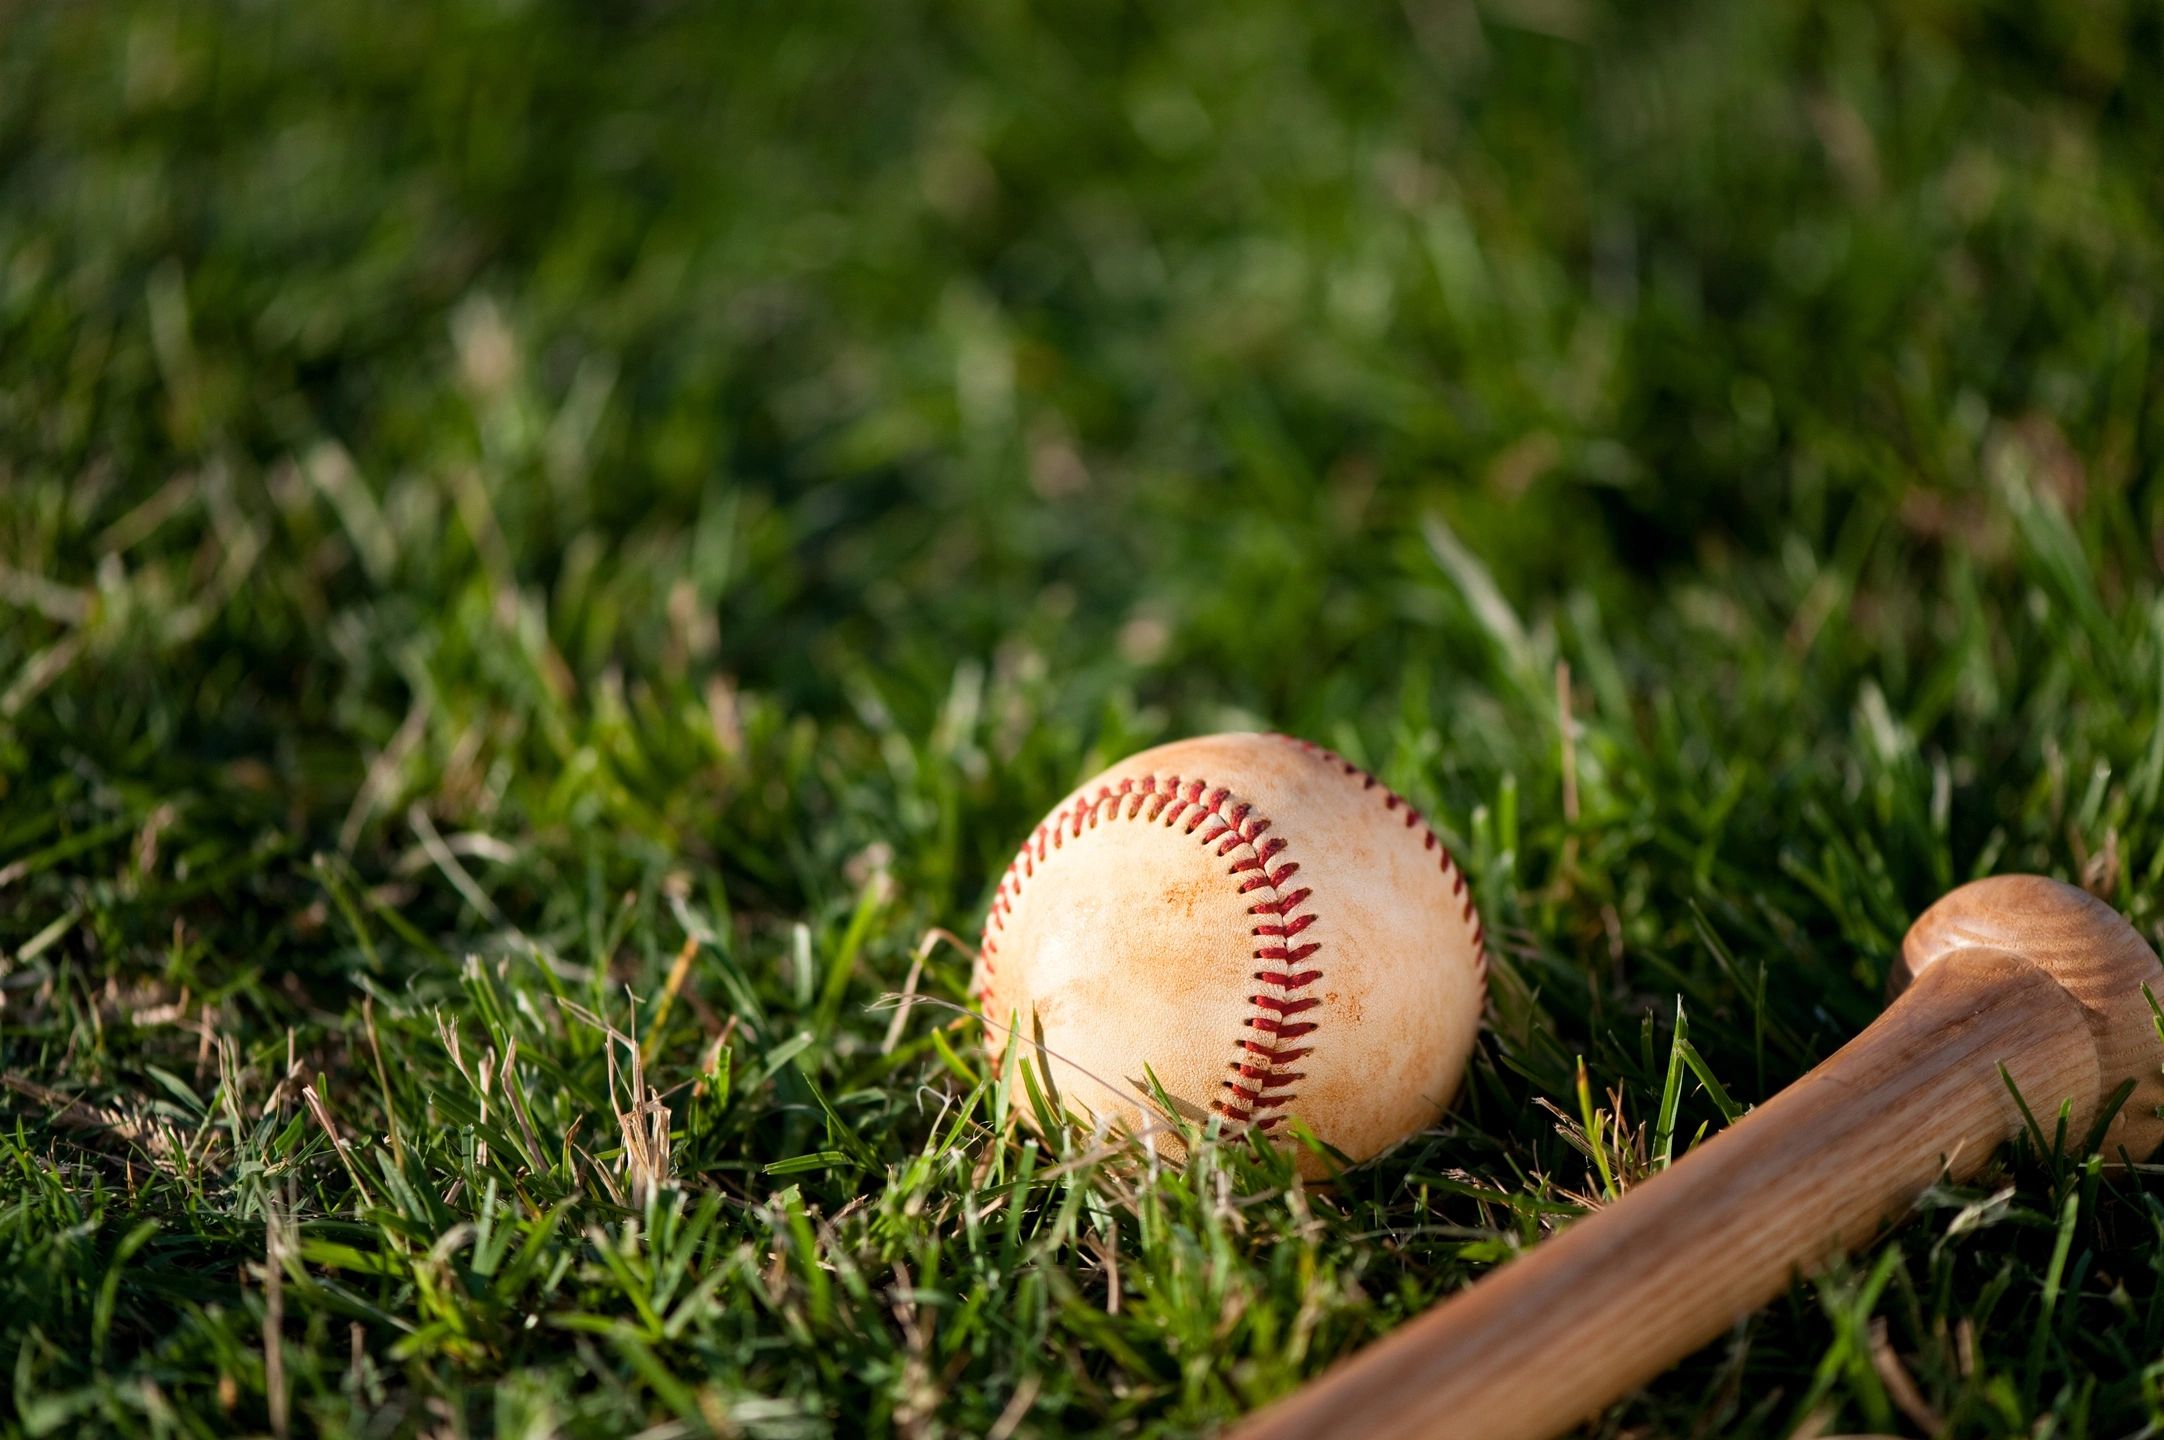 Stealing Home Why Baseballs Antitrust Exemption Should Be Eliminated in the Age of Modern Internet Streaming and Piracy